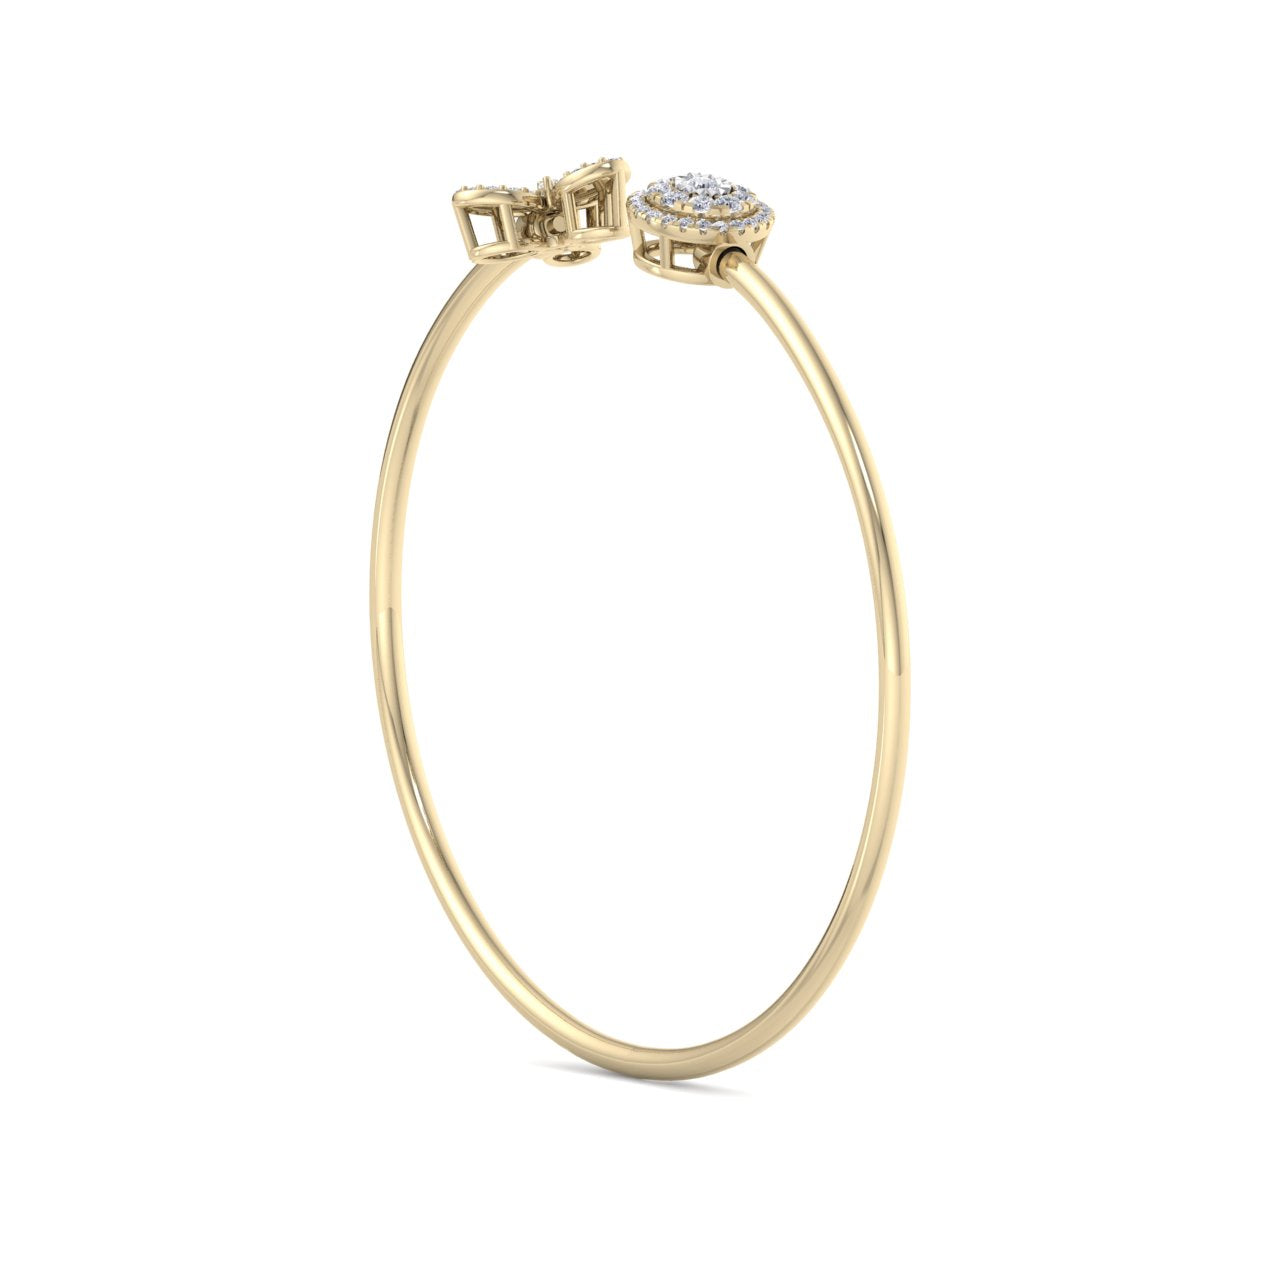 Cuff bracelet in yellow gold with white diamonds of 0.47 ct in weight